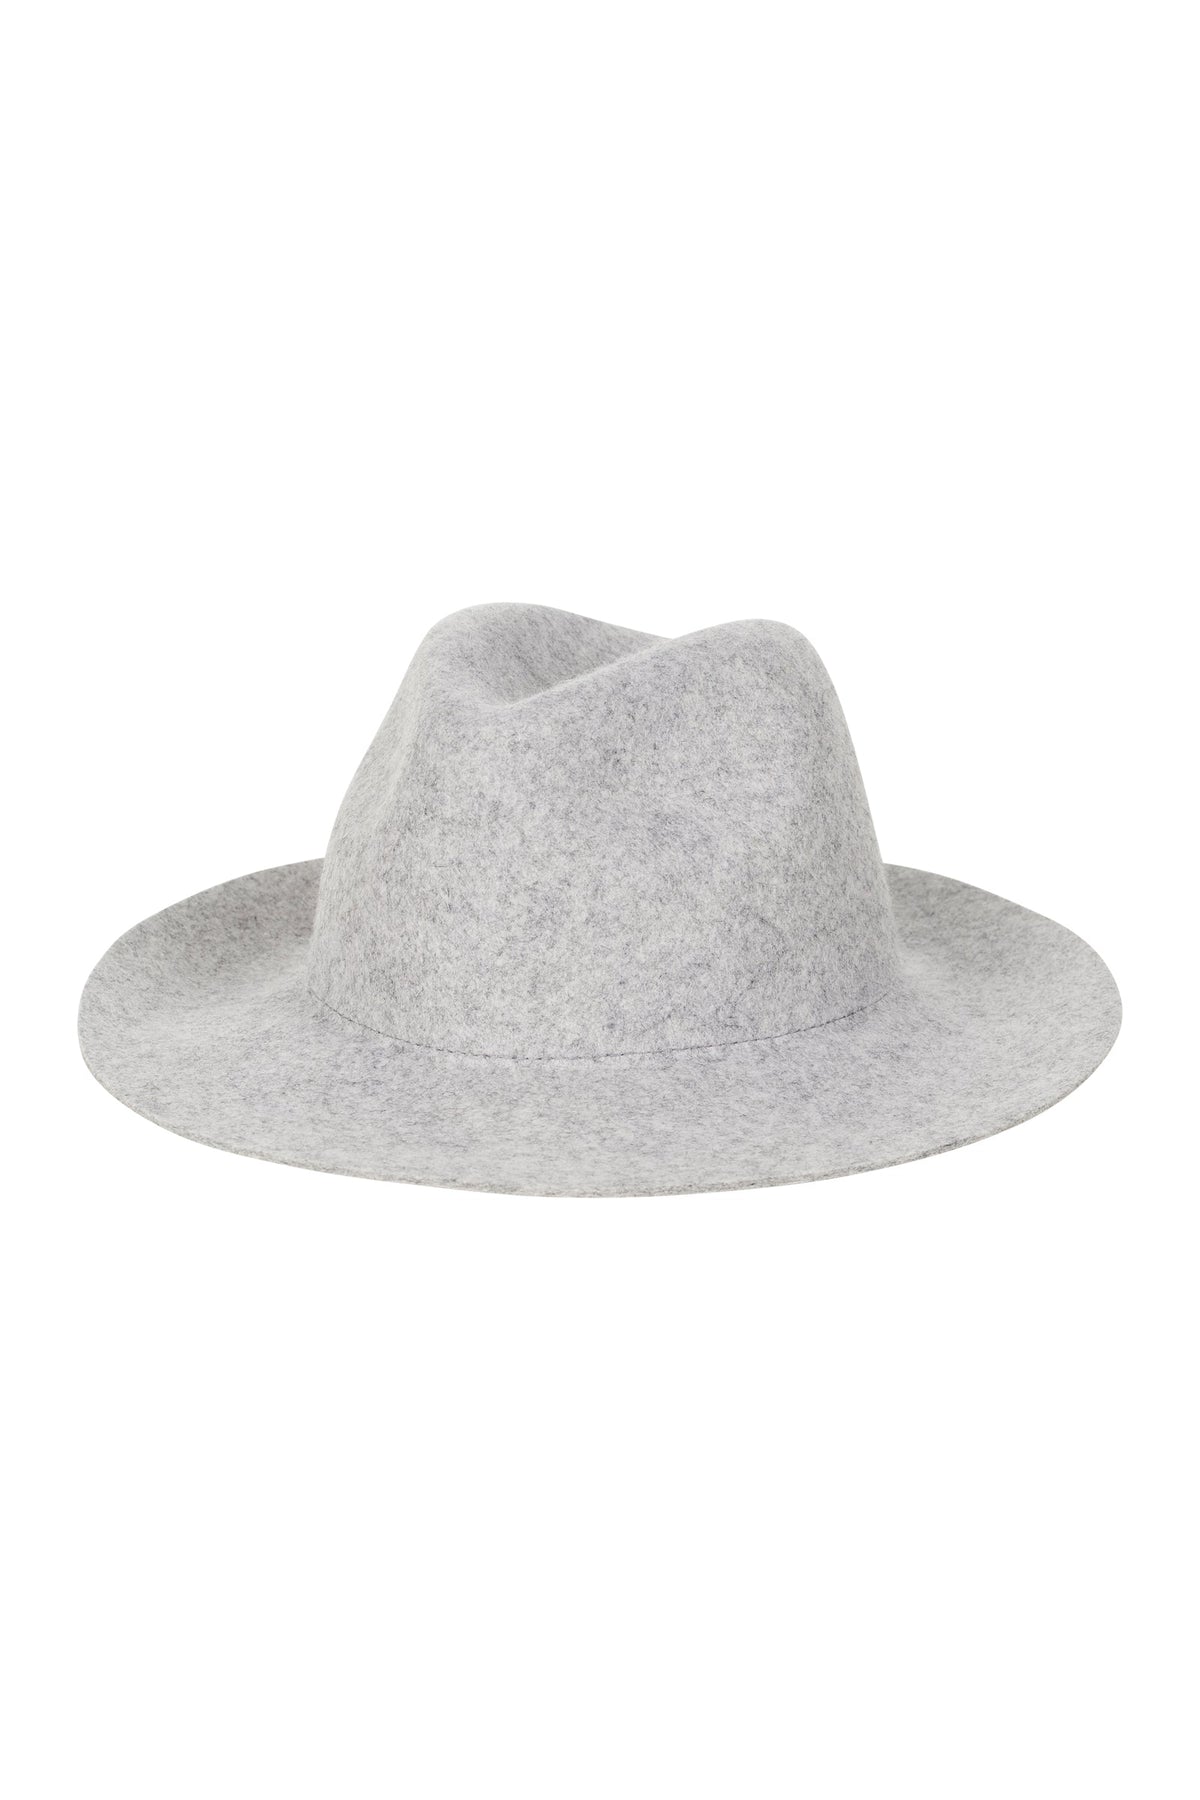 Departure Hat - EB & IVE Accessories One Size Marle NZ LUMA